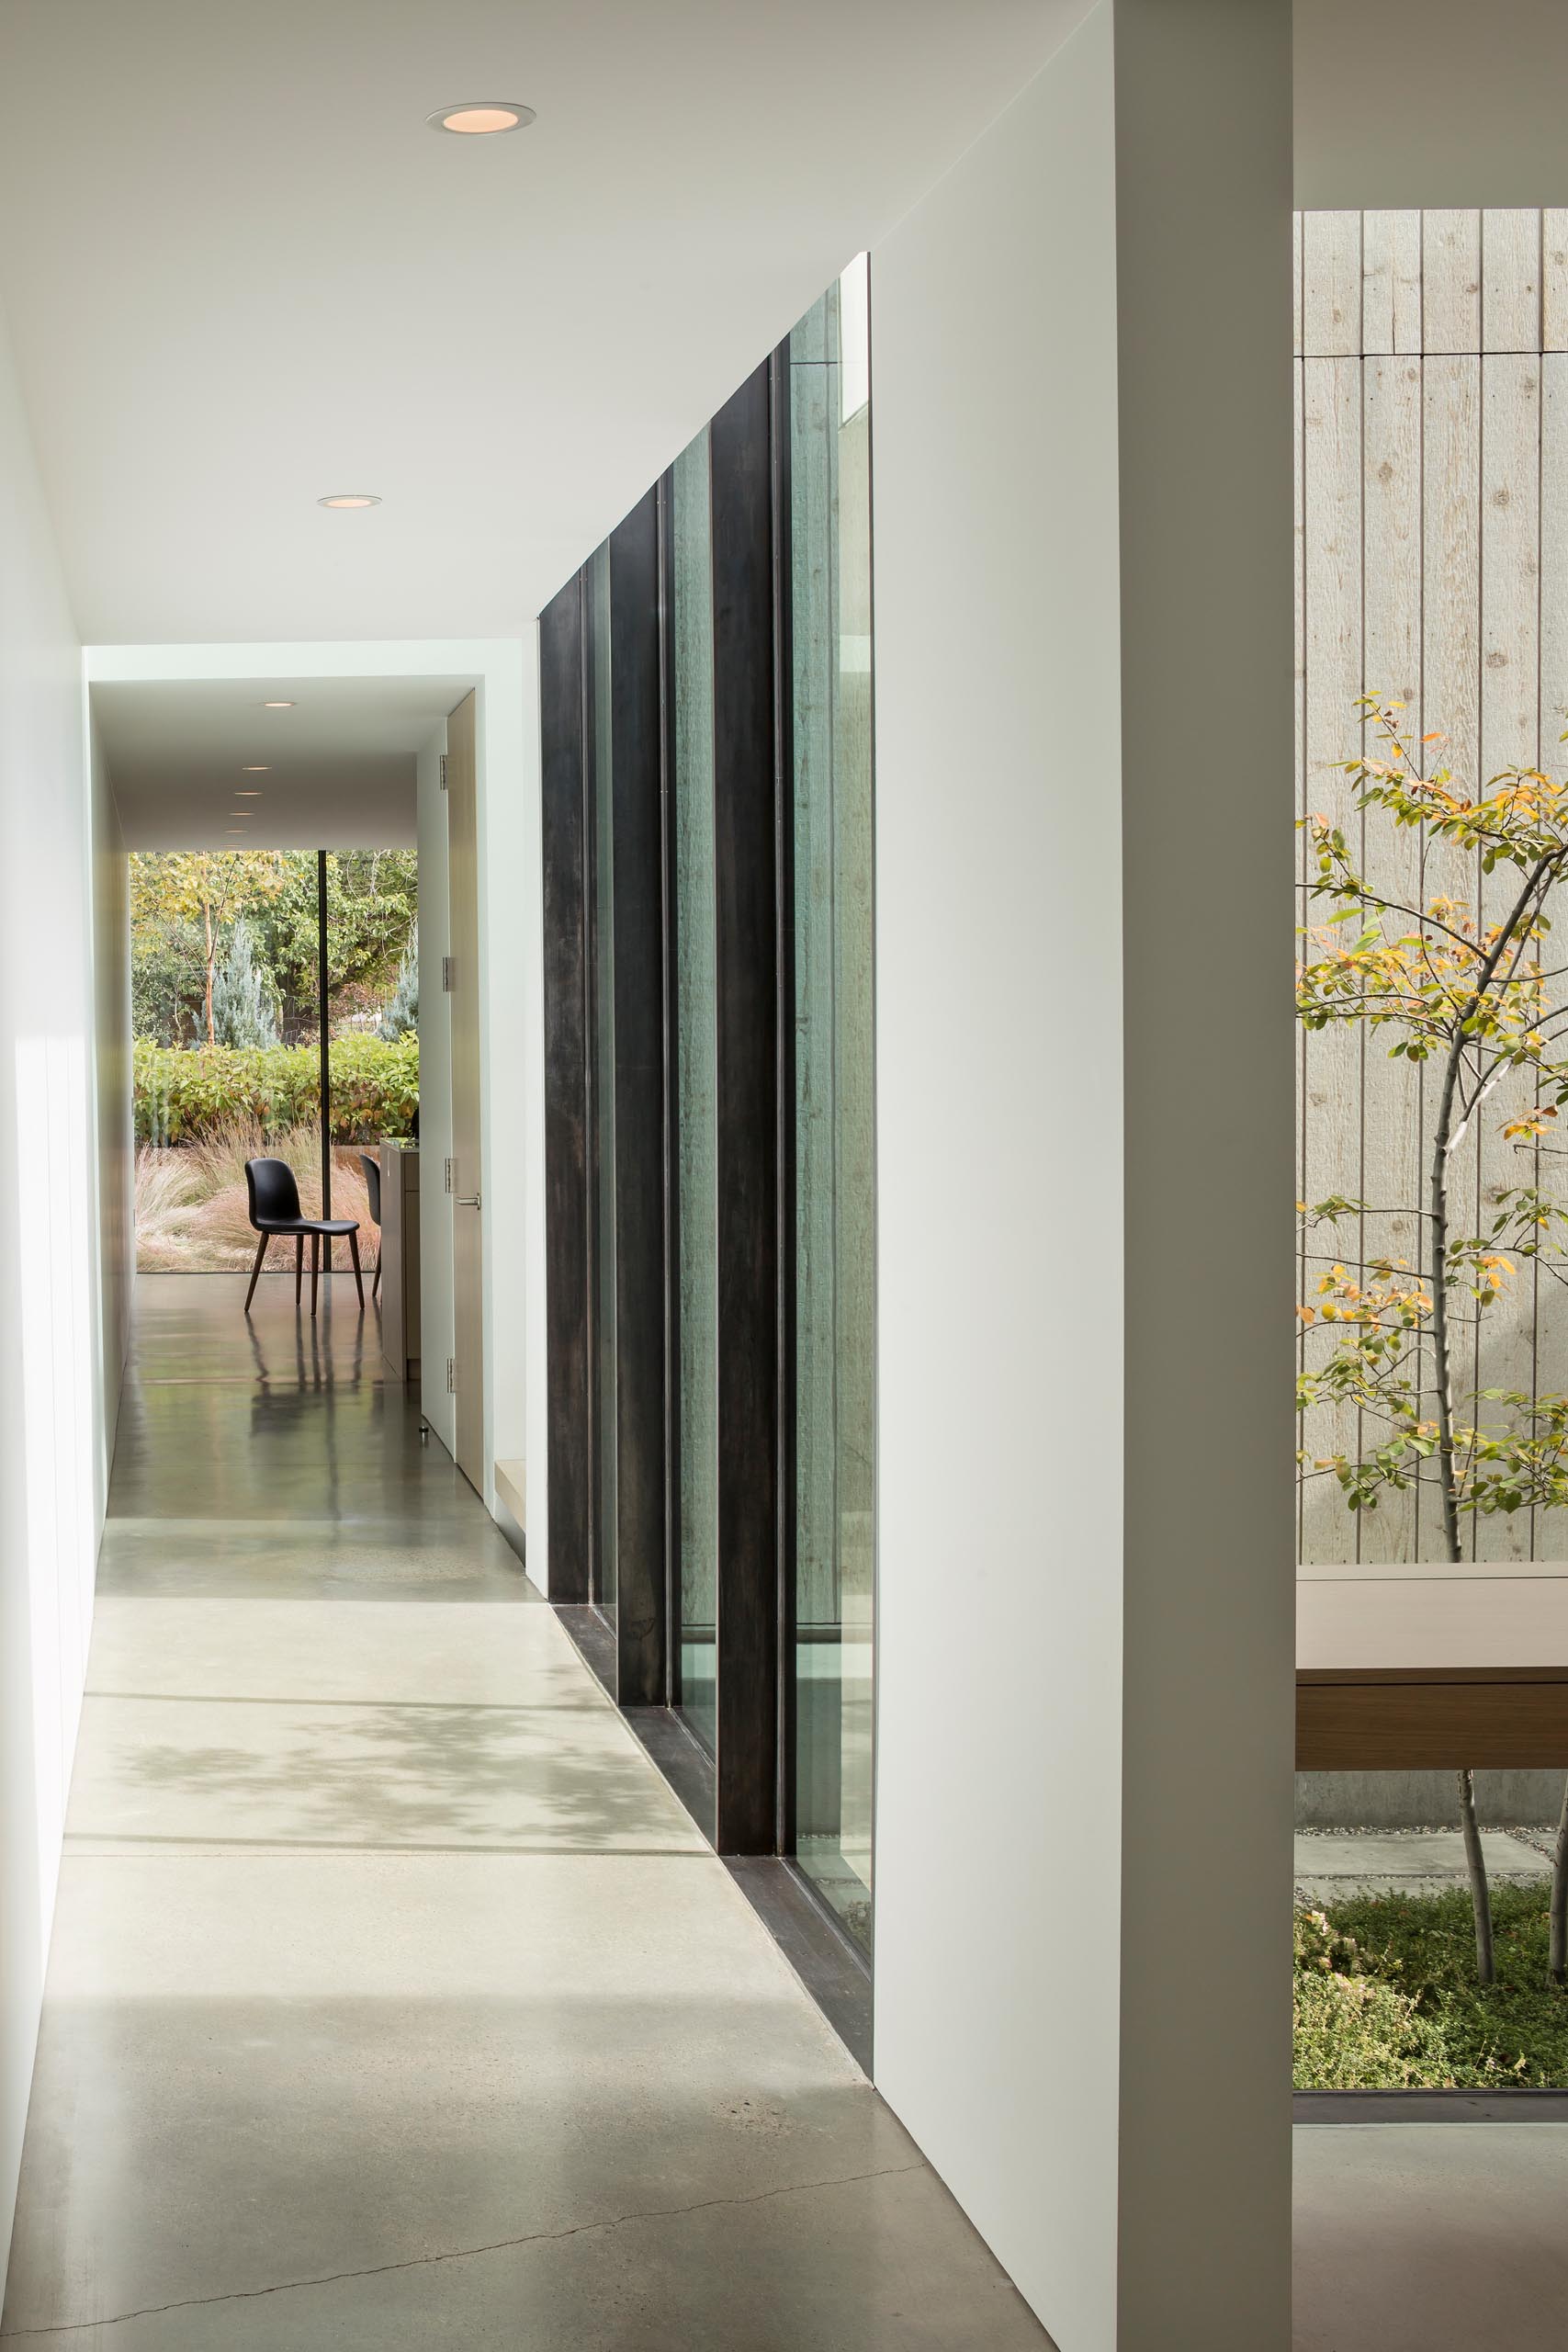 A modern home with a long hallway, floor-to-ceiling windows, and concrete floors.